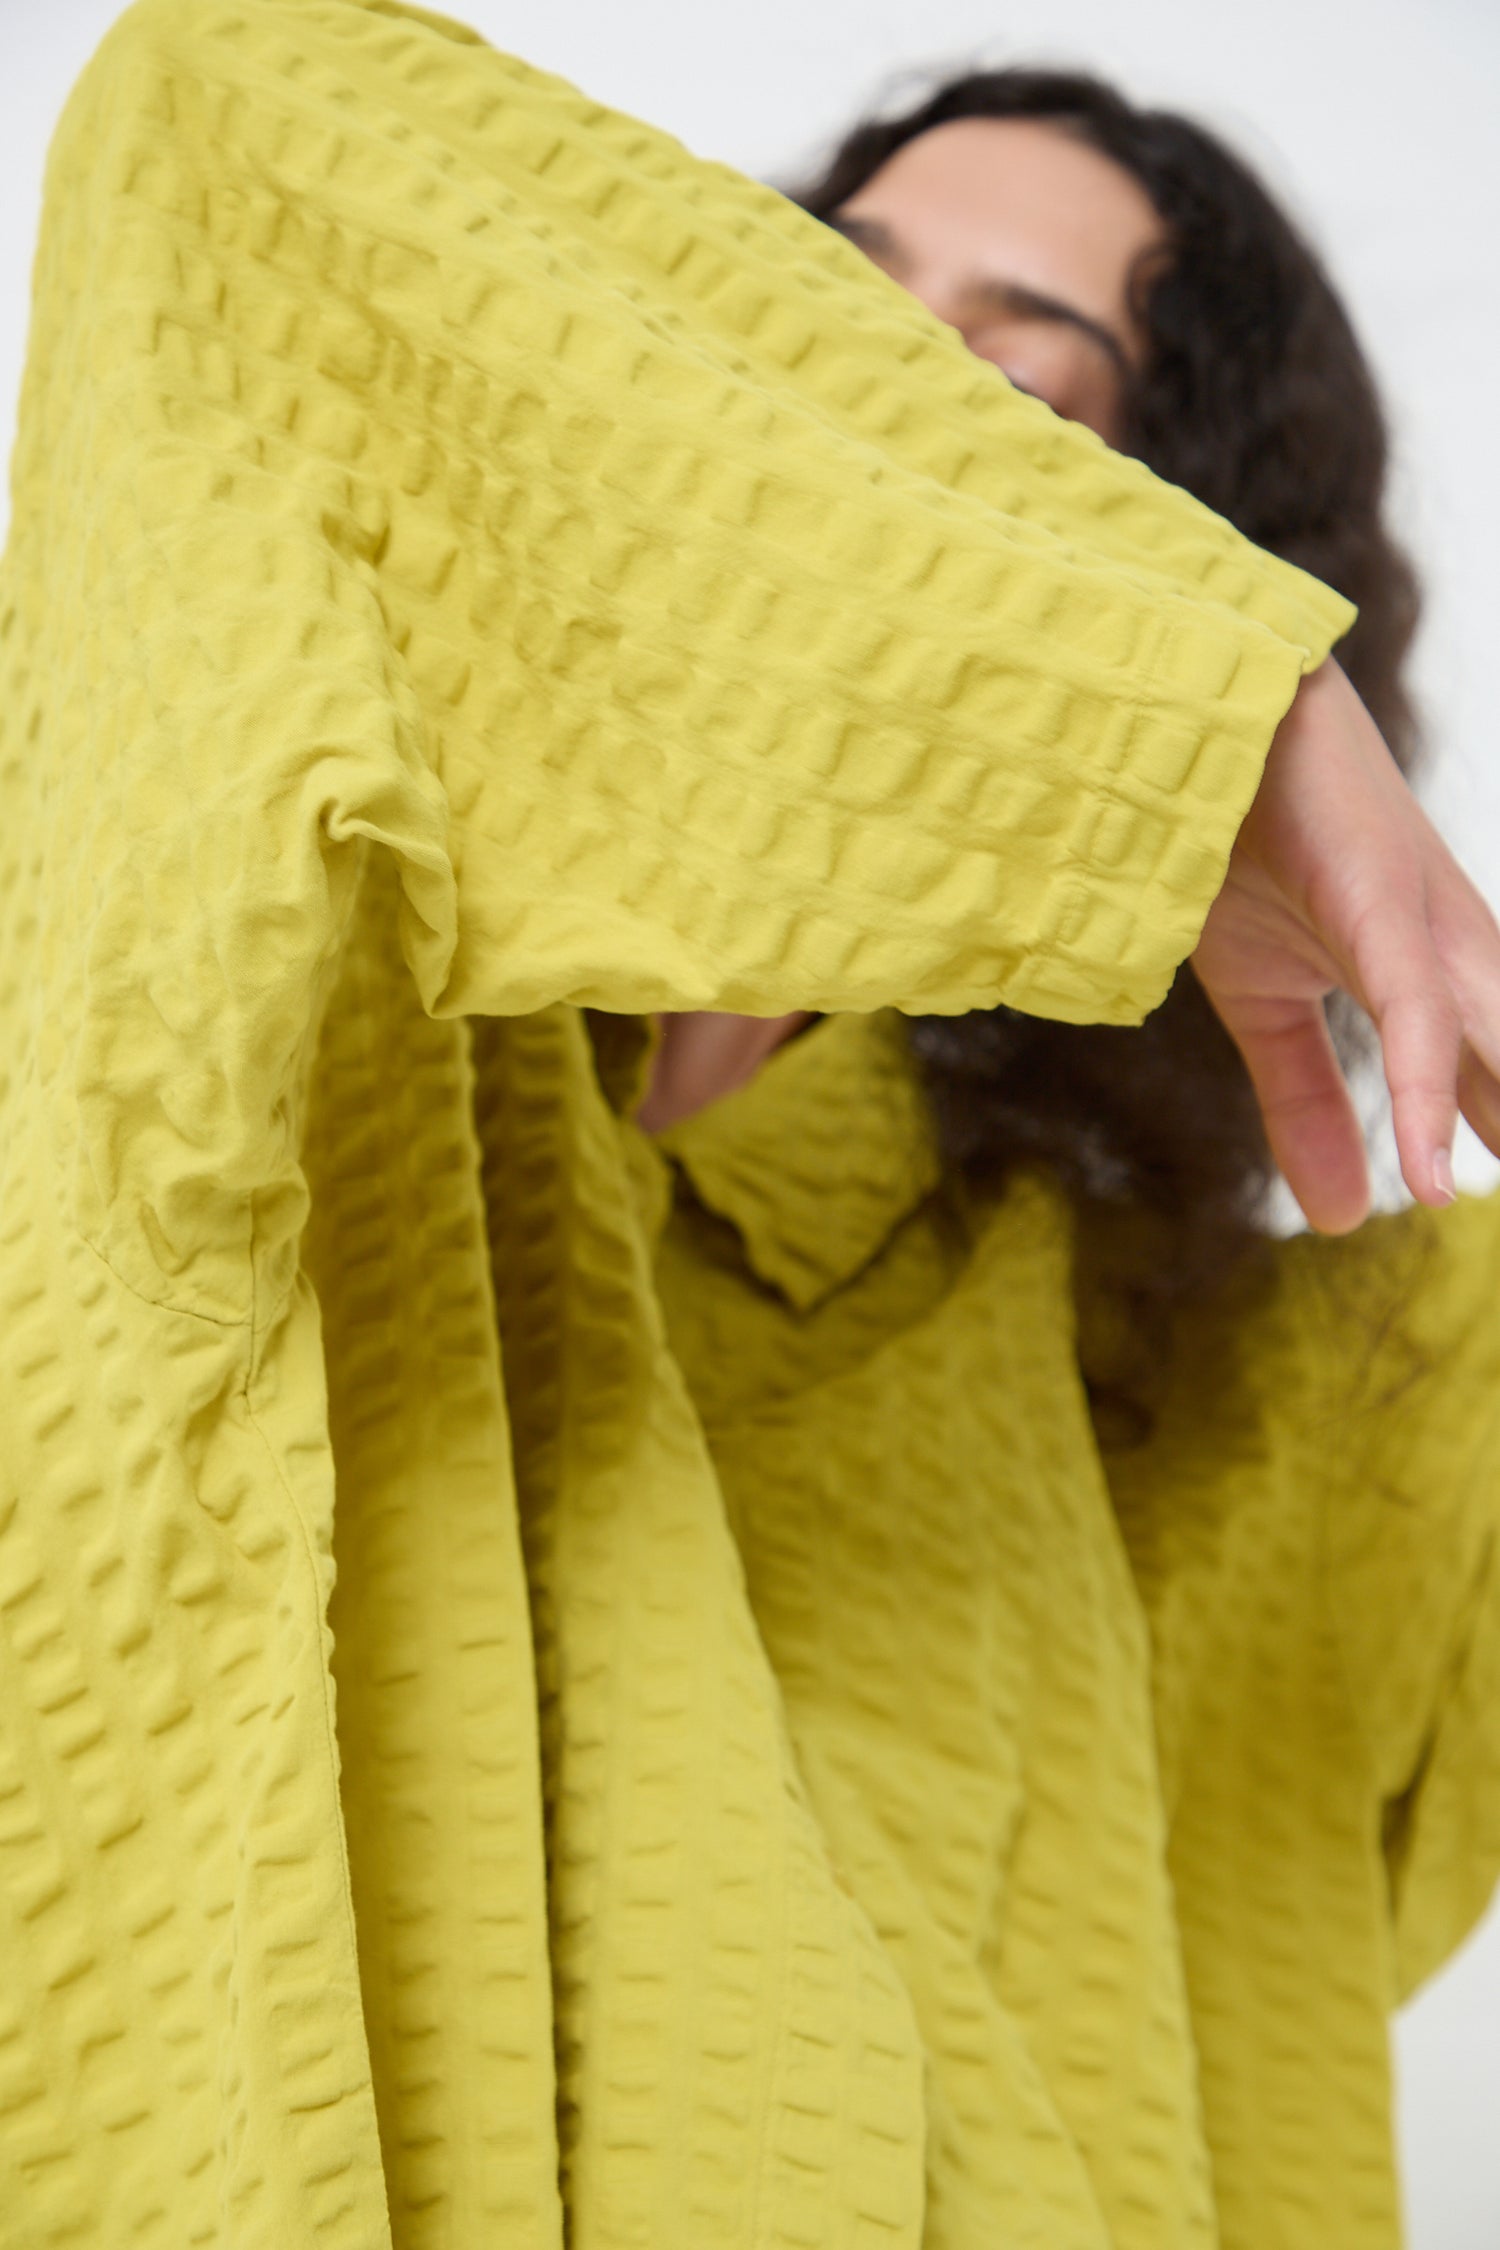 A person in a yellow Cotton Seersucker Chelsea Collar Shirt in Turmeric by Black Crane, with their arm raised partially obscuring their face.